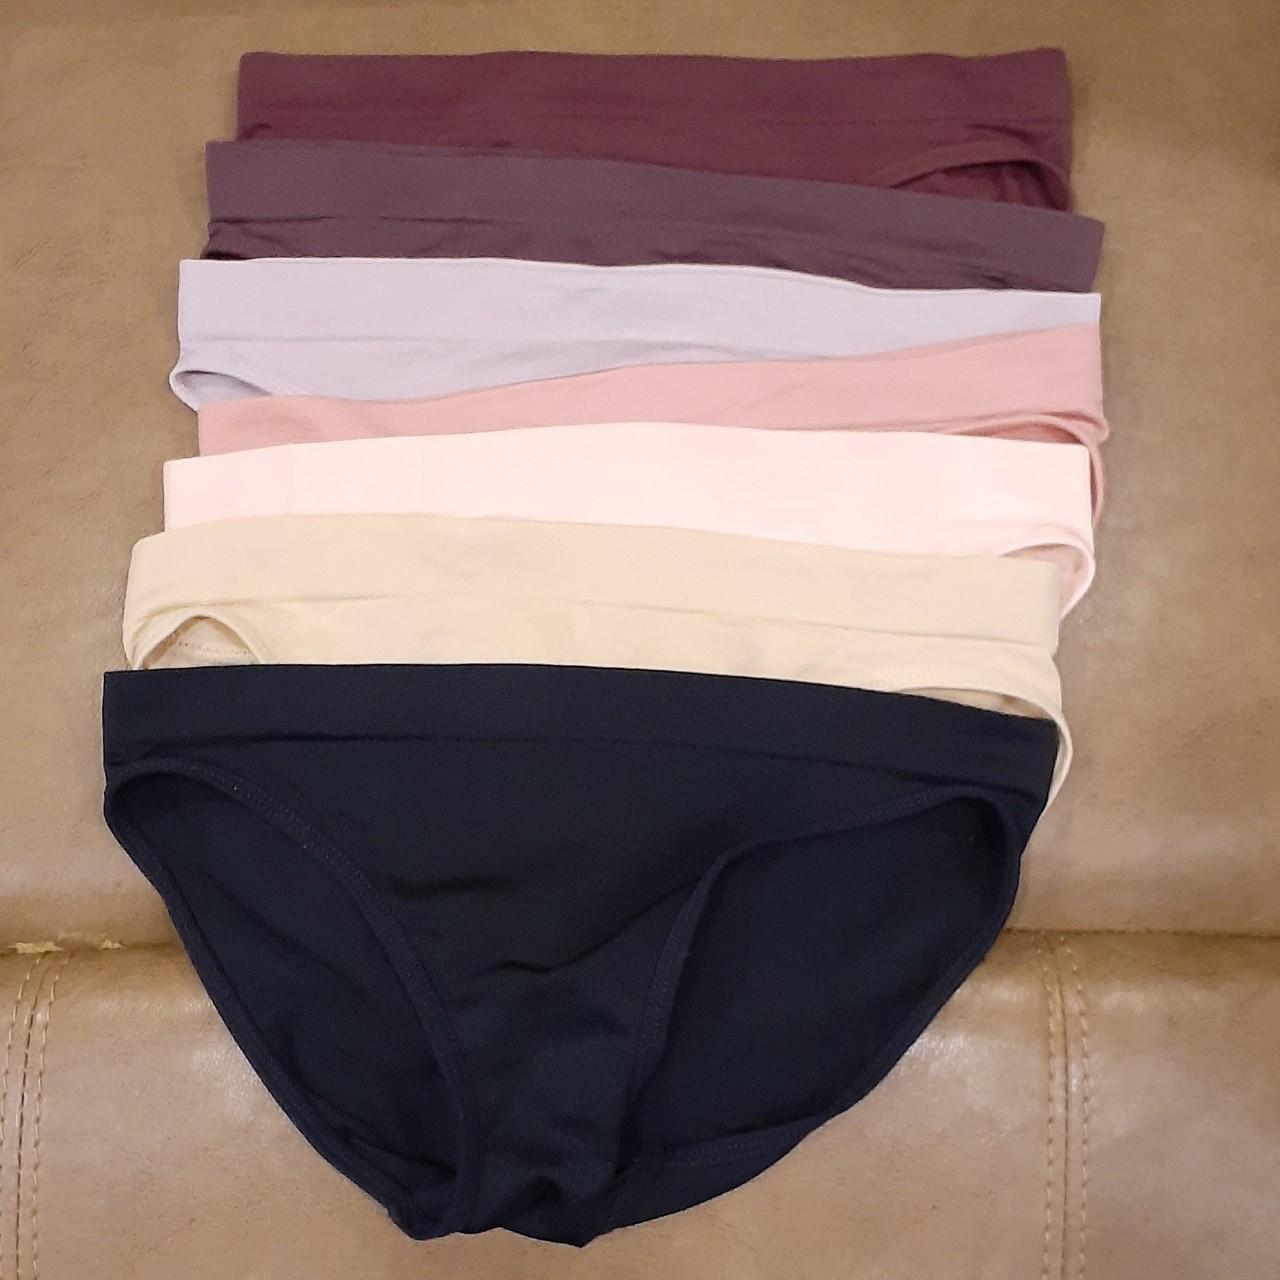 Attributes panties set of 7 pairs. It is labeled as